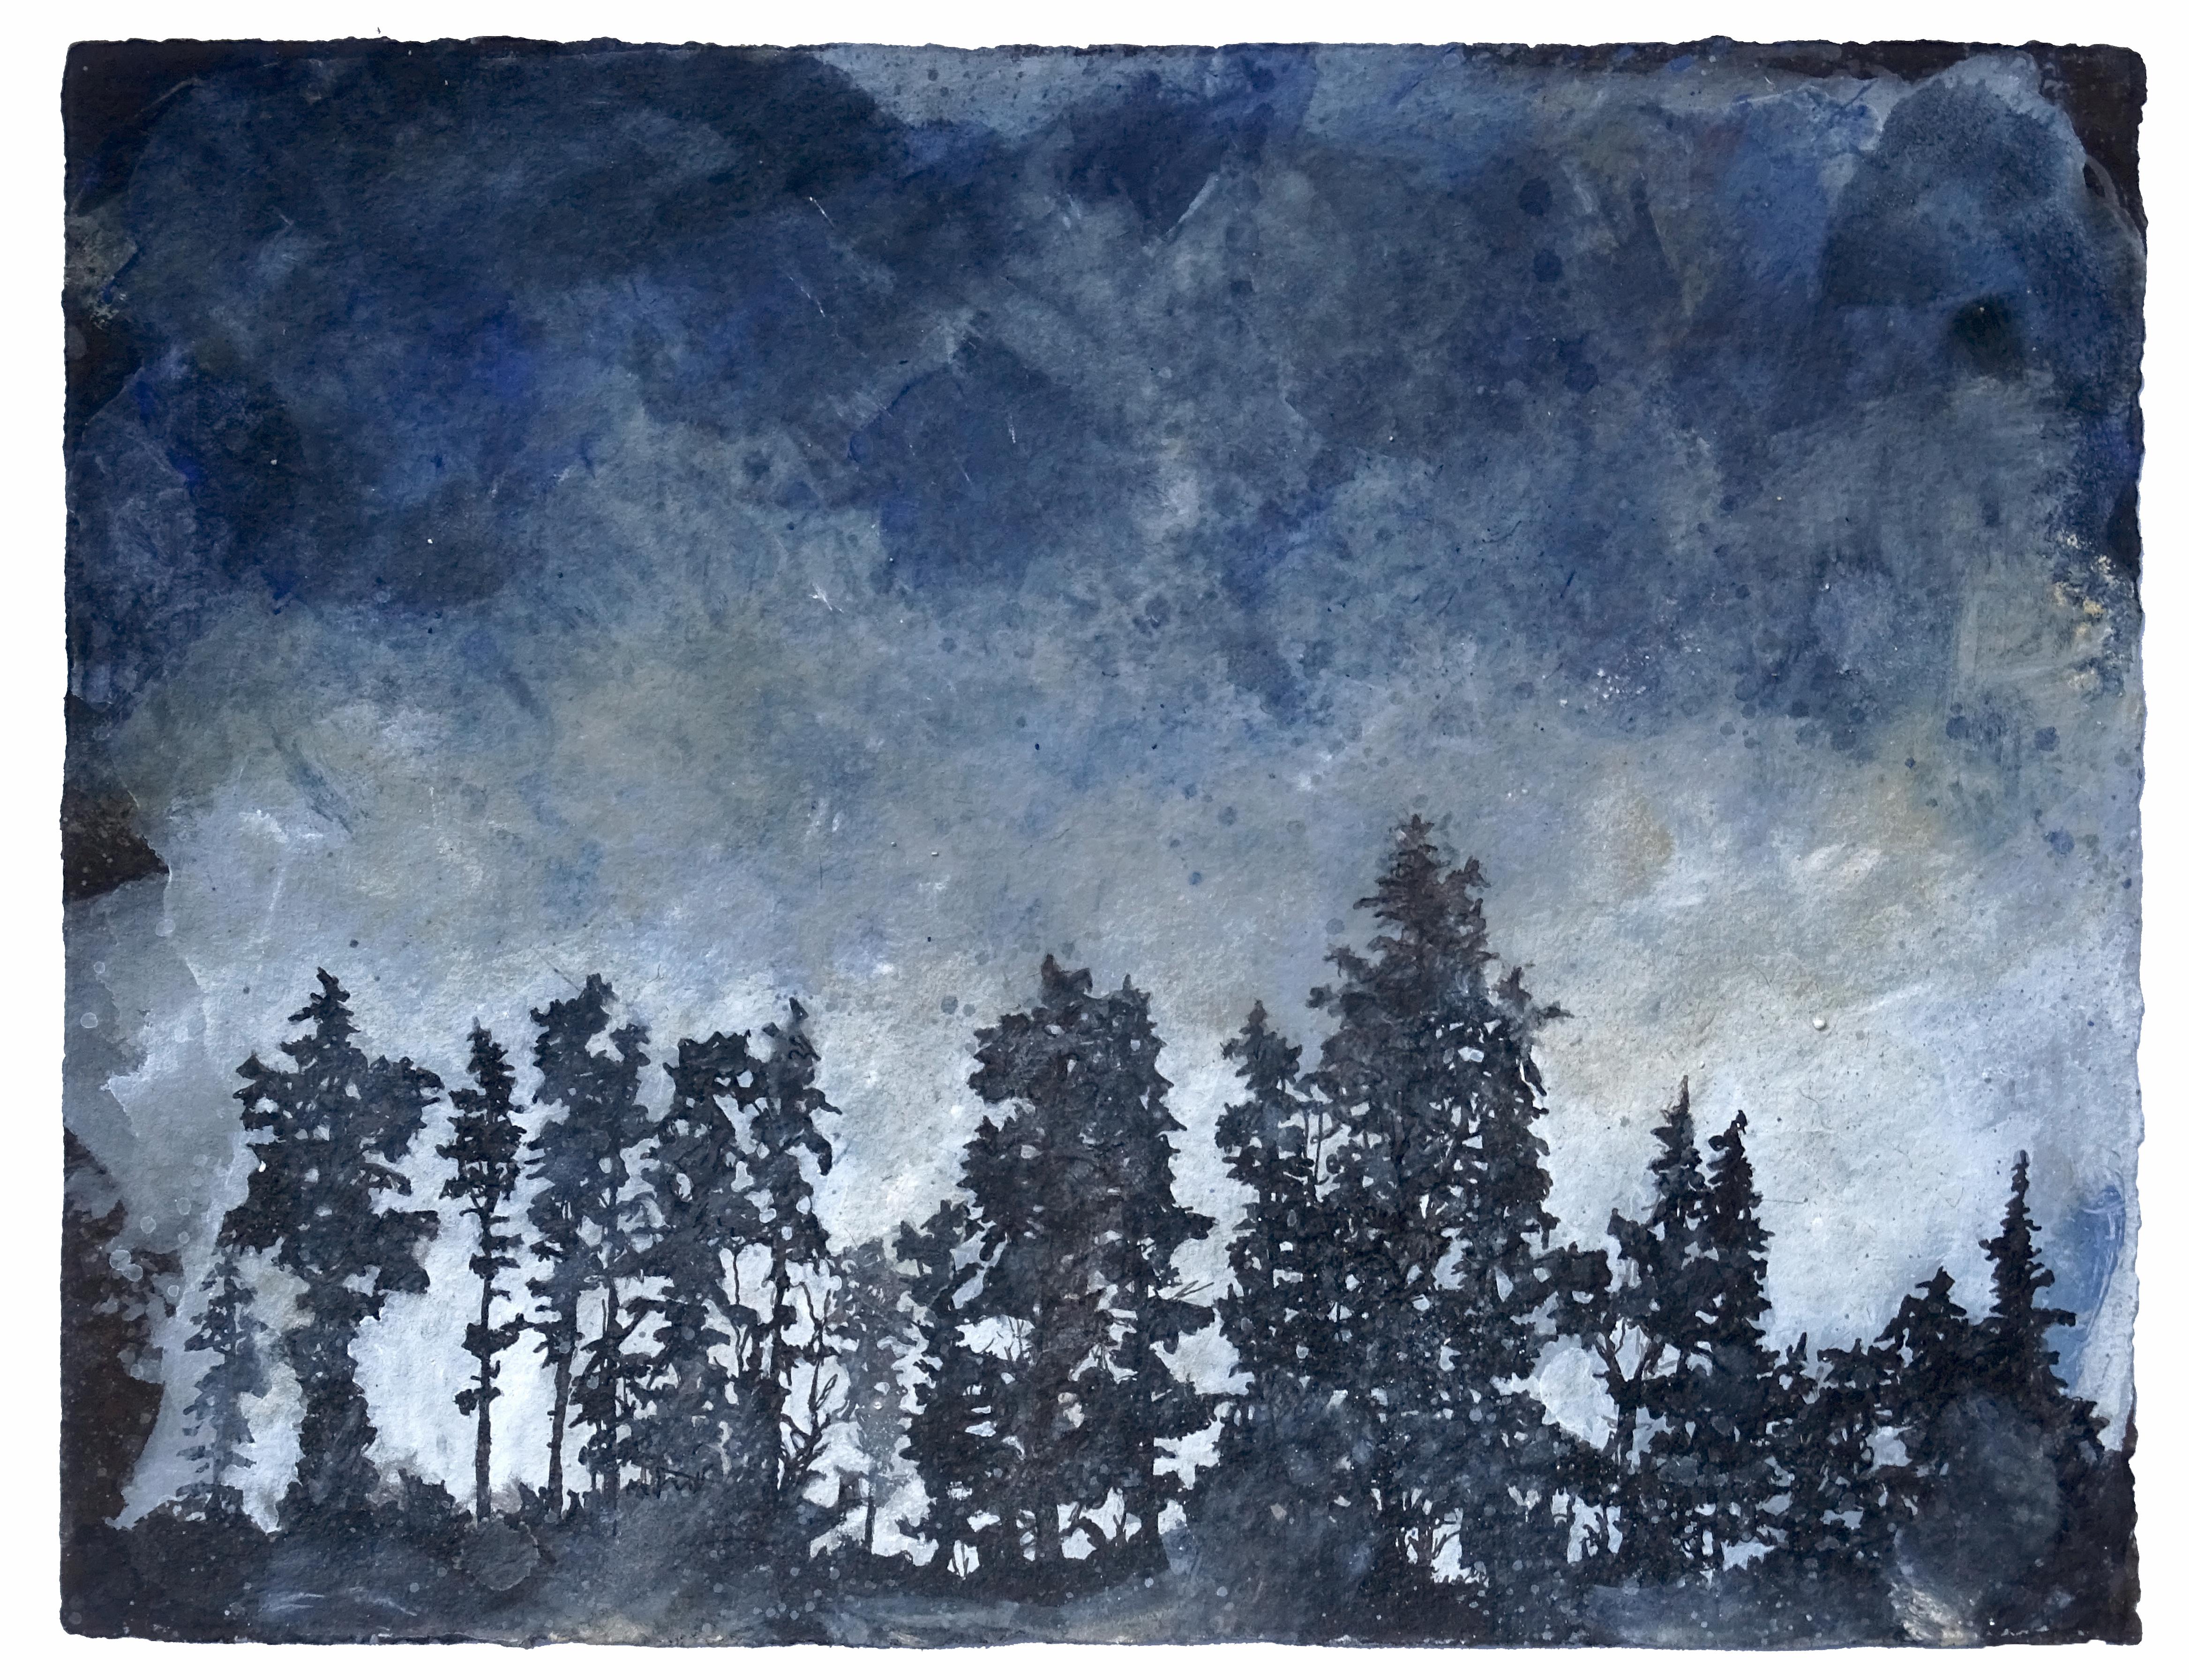 Frank Girard Landscape Art – "The Cold Wind in the Pine Trees",  Pigment-Aquarell-Acryl-Papier-Zeichnung 